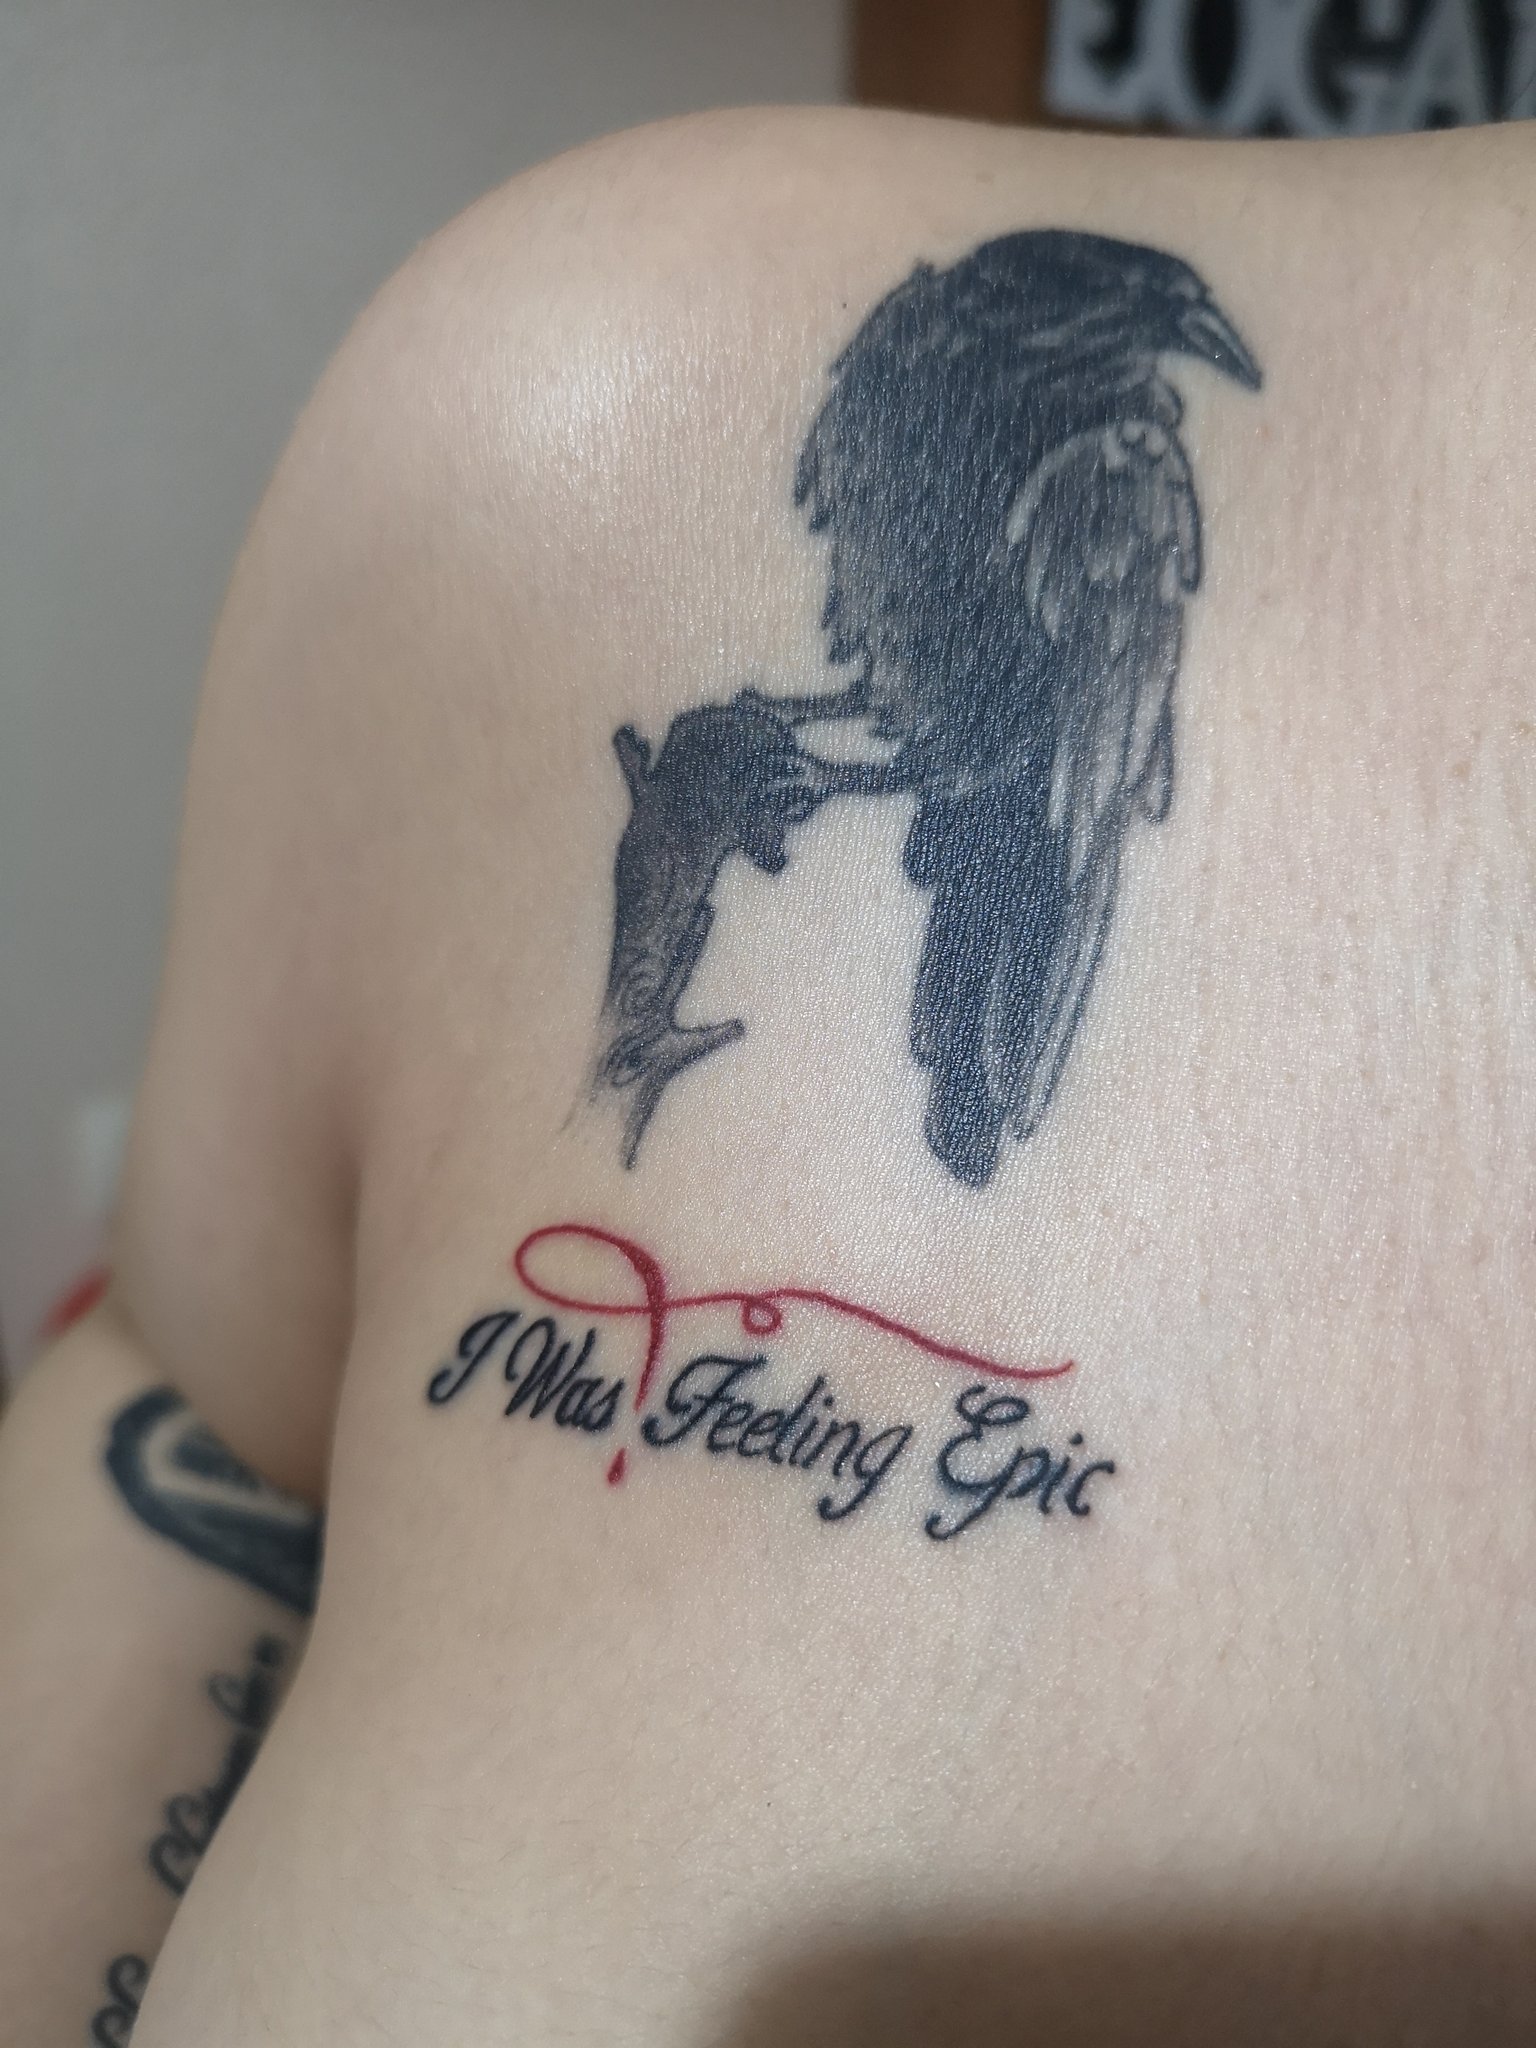 Fridge Logo Tattoo Woman Discovers Real Meaning Behind Inking